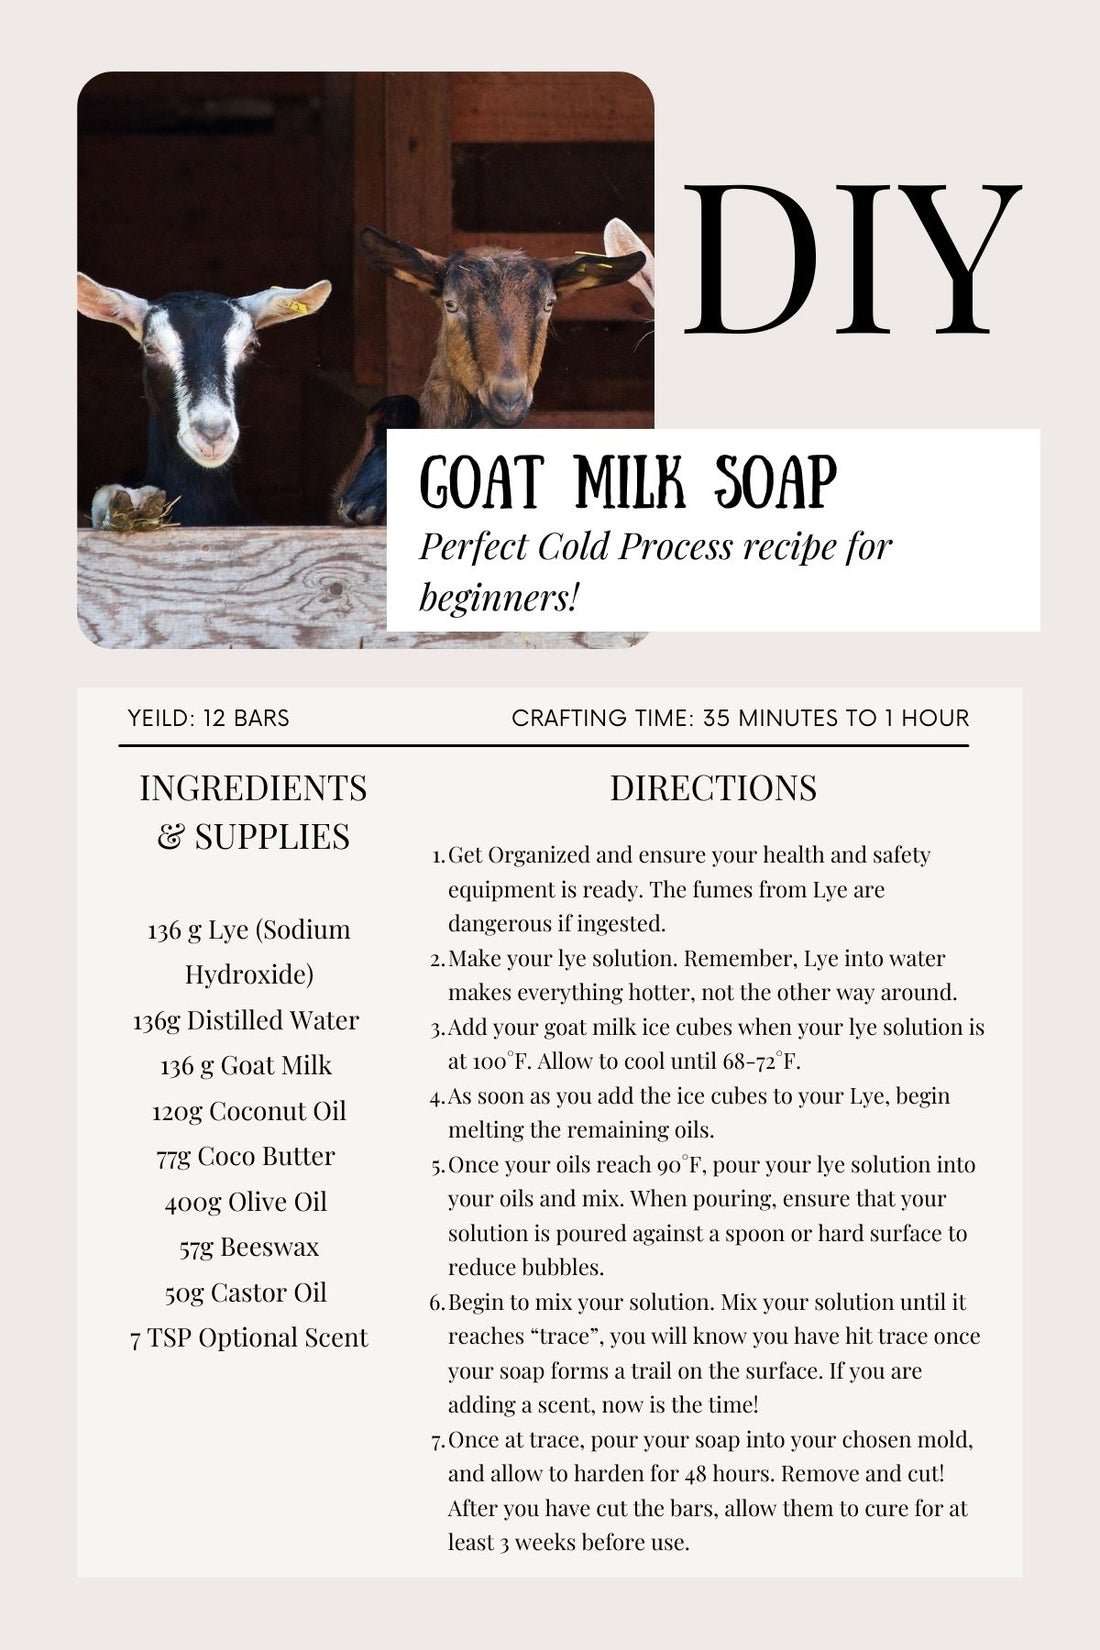 DIY: How to make Goat Milk Cold Process Soap